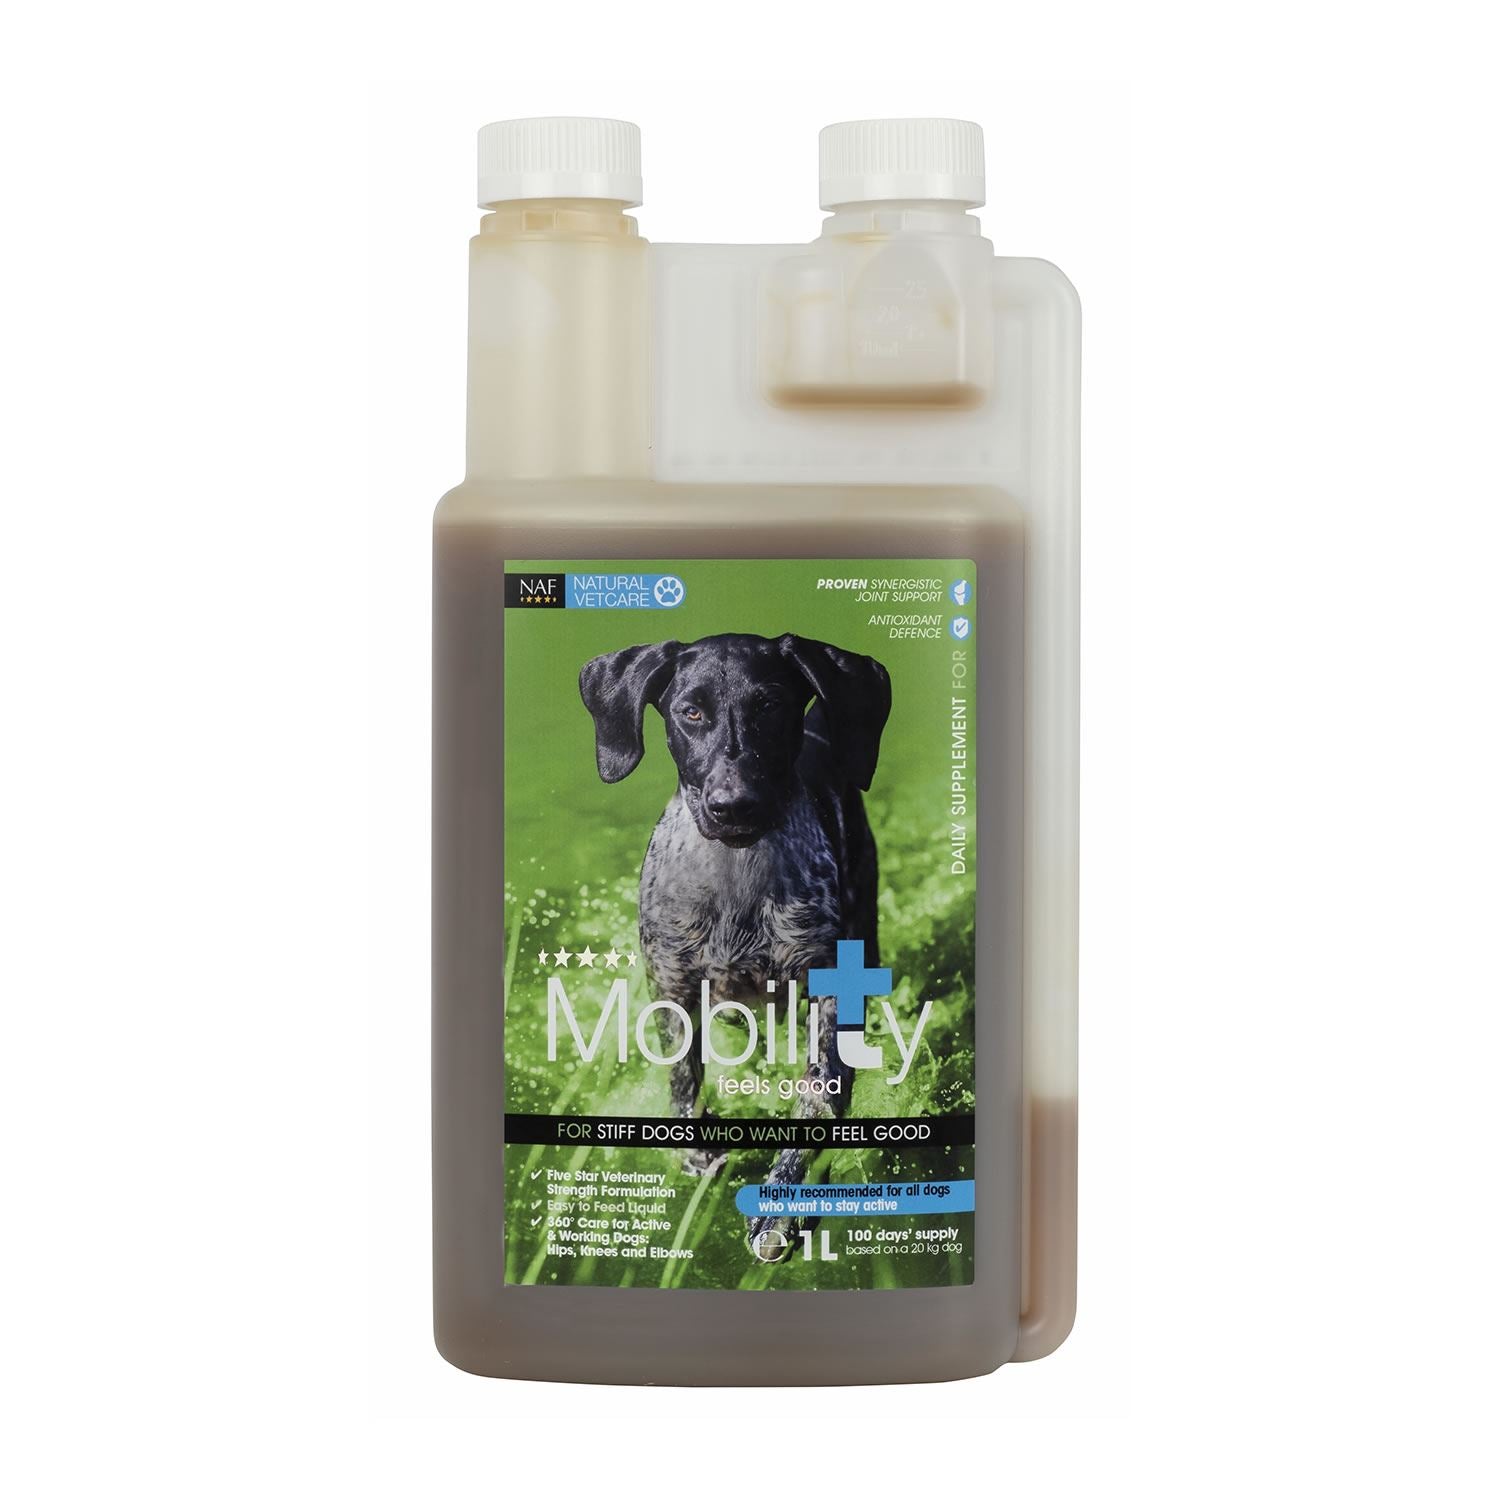 Nvc Mobility Liquid - Just Horse Riders